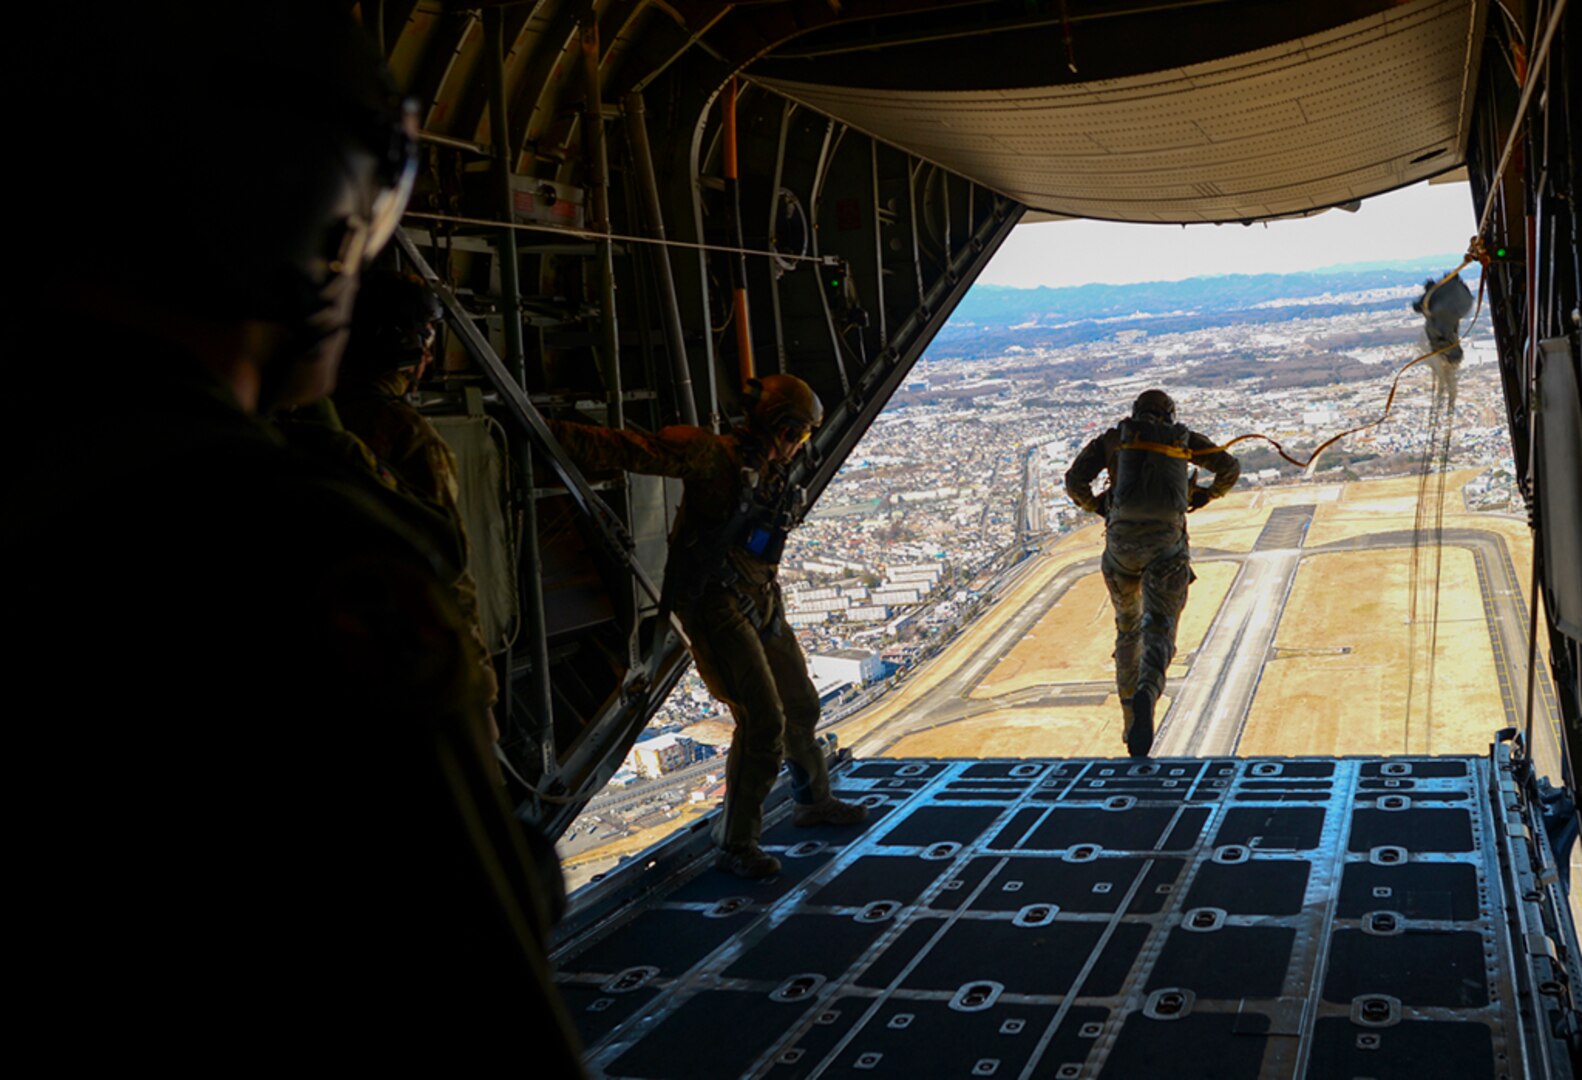 Senior Airman Andrew Fox, 36th Airlift Squadron instructor C-130 Hercules loadmaster, supervises a personnel drop over Yokota Air Base, Japan Jan. 25, 2016. Loadmasters are responsible for ensuring that aircraft cargo and passengers are transported safely and in a timely manner, which involves preparing rigging inside the aircraft and performing checks before and during the flight to ensure the safety of personnel and equipment. 